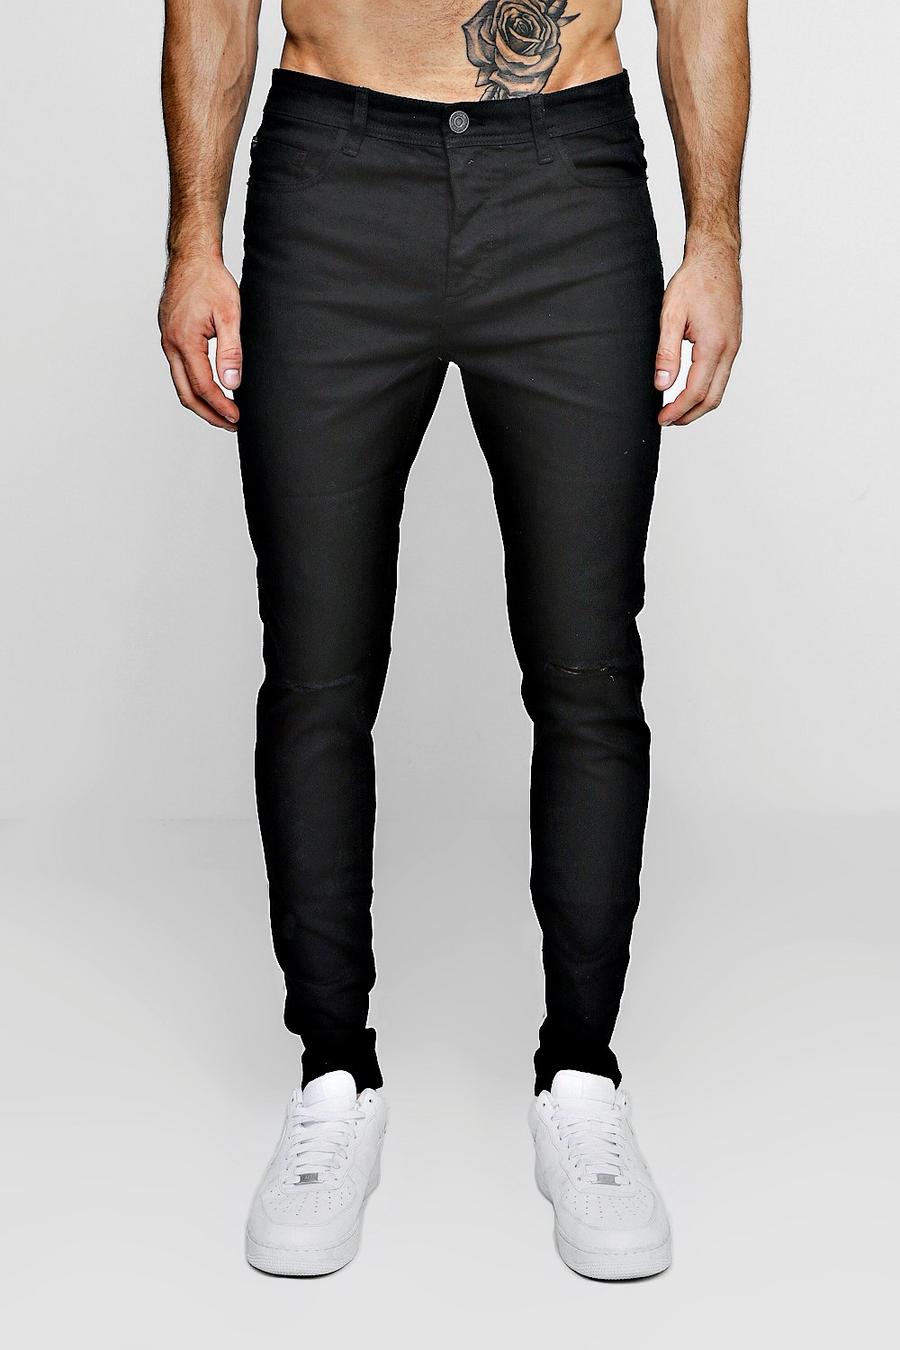 Black Stretch Skinny Jeans With Ripped Knees image number 1